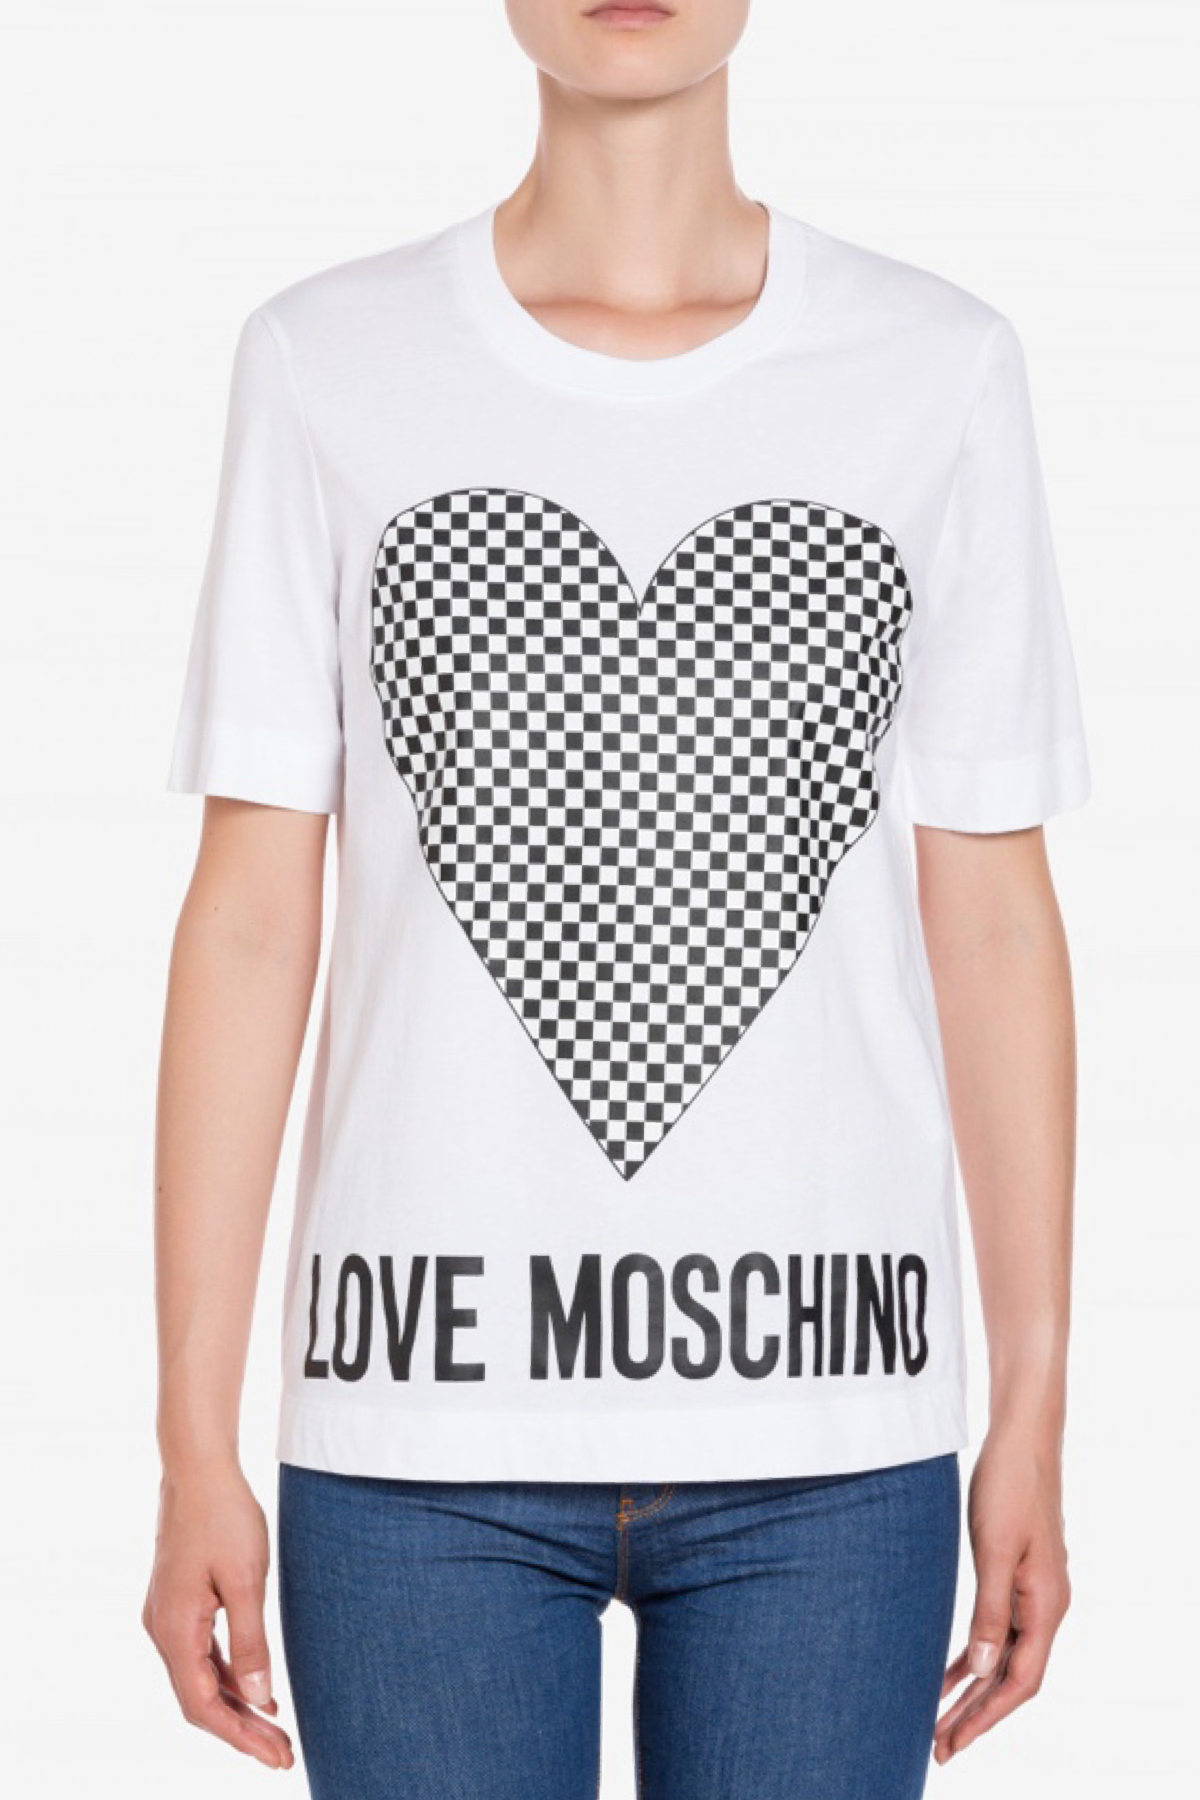 D3 LOVE MOSCHINO T-SHIRT cuore check